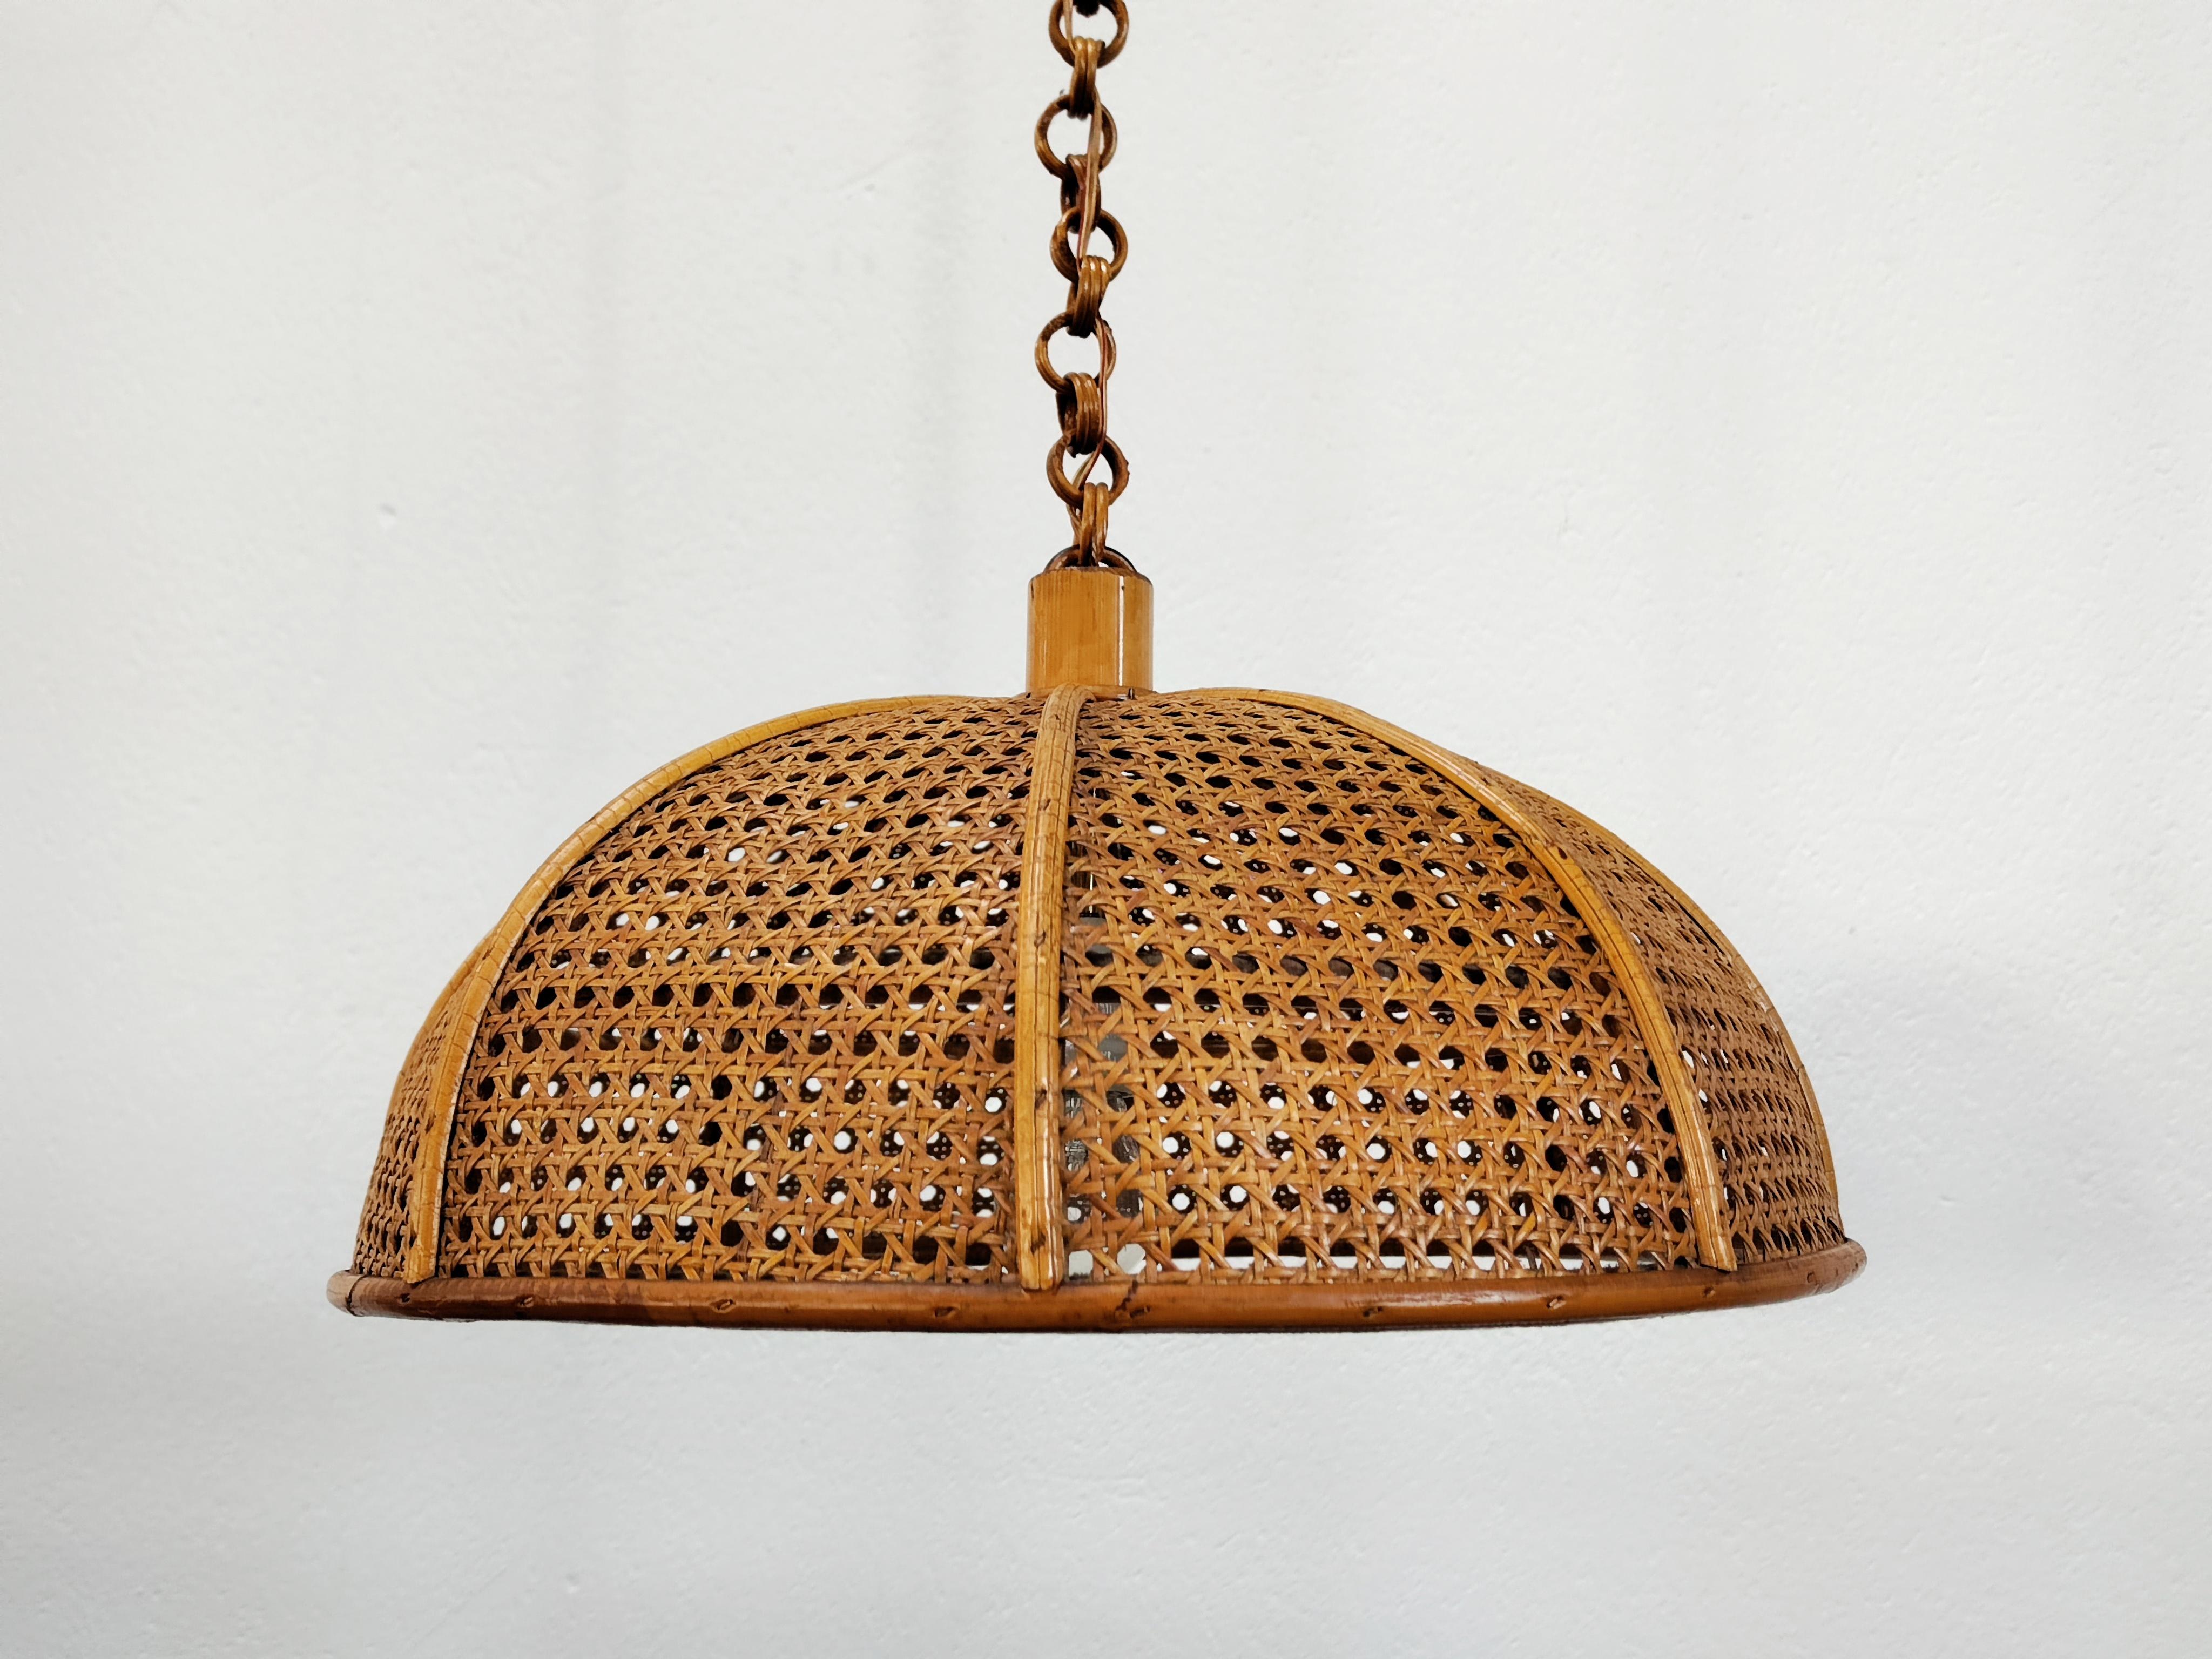 In this listing you will find a very rare and very attractive Mid Century Modern wicker pendant light. It is made of bamboo and rattan, put together into an octagonal shape, creating circle. Made in Italy in 1950s.

Pendant is in good vintage